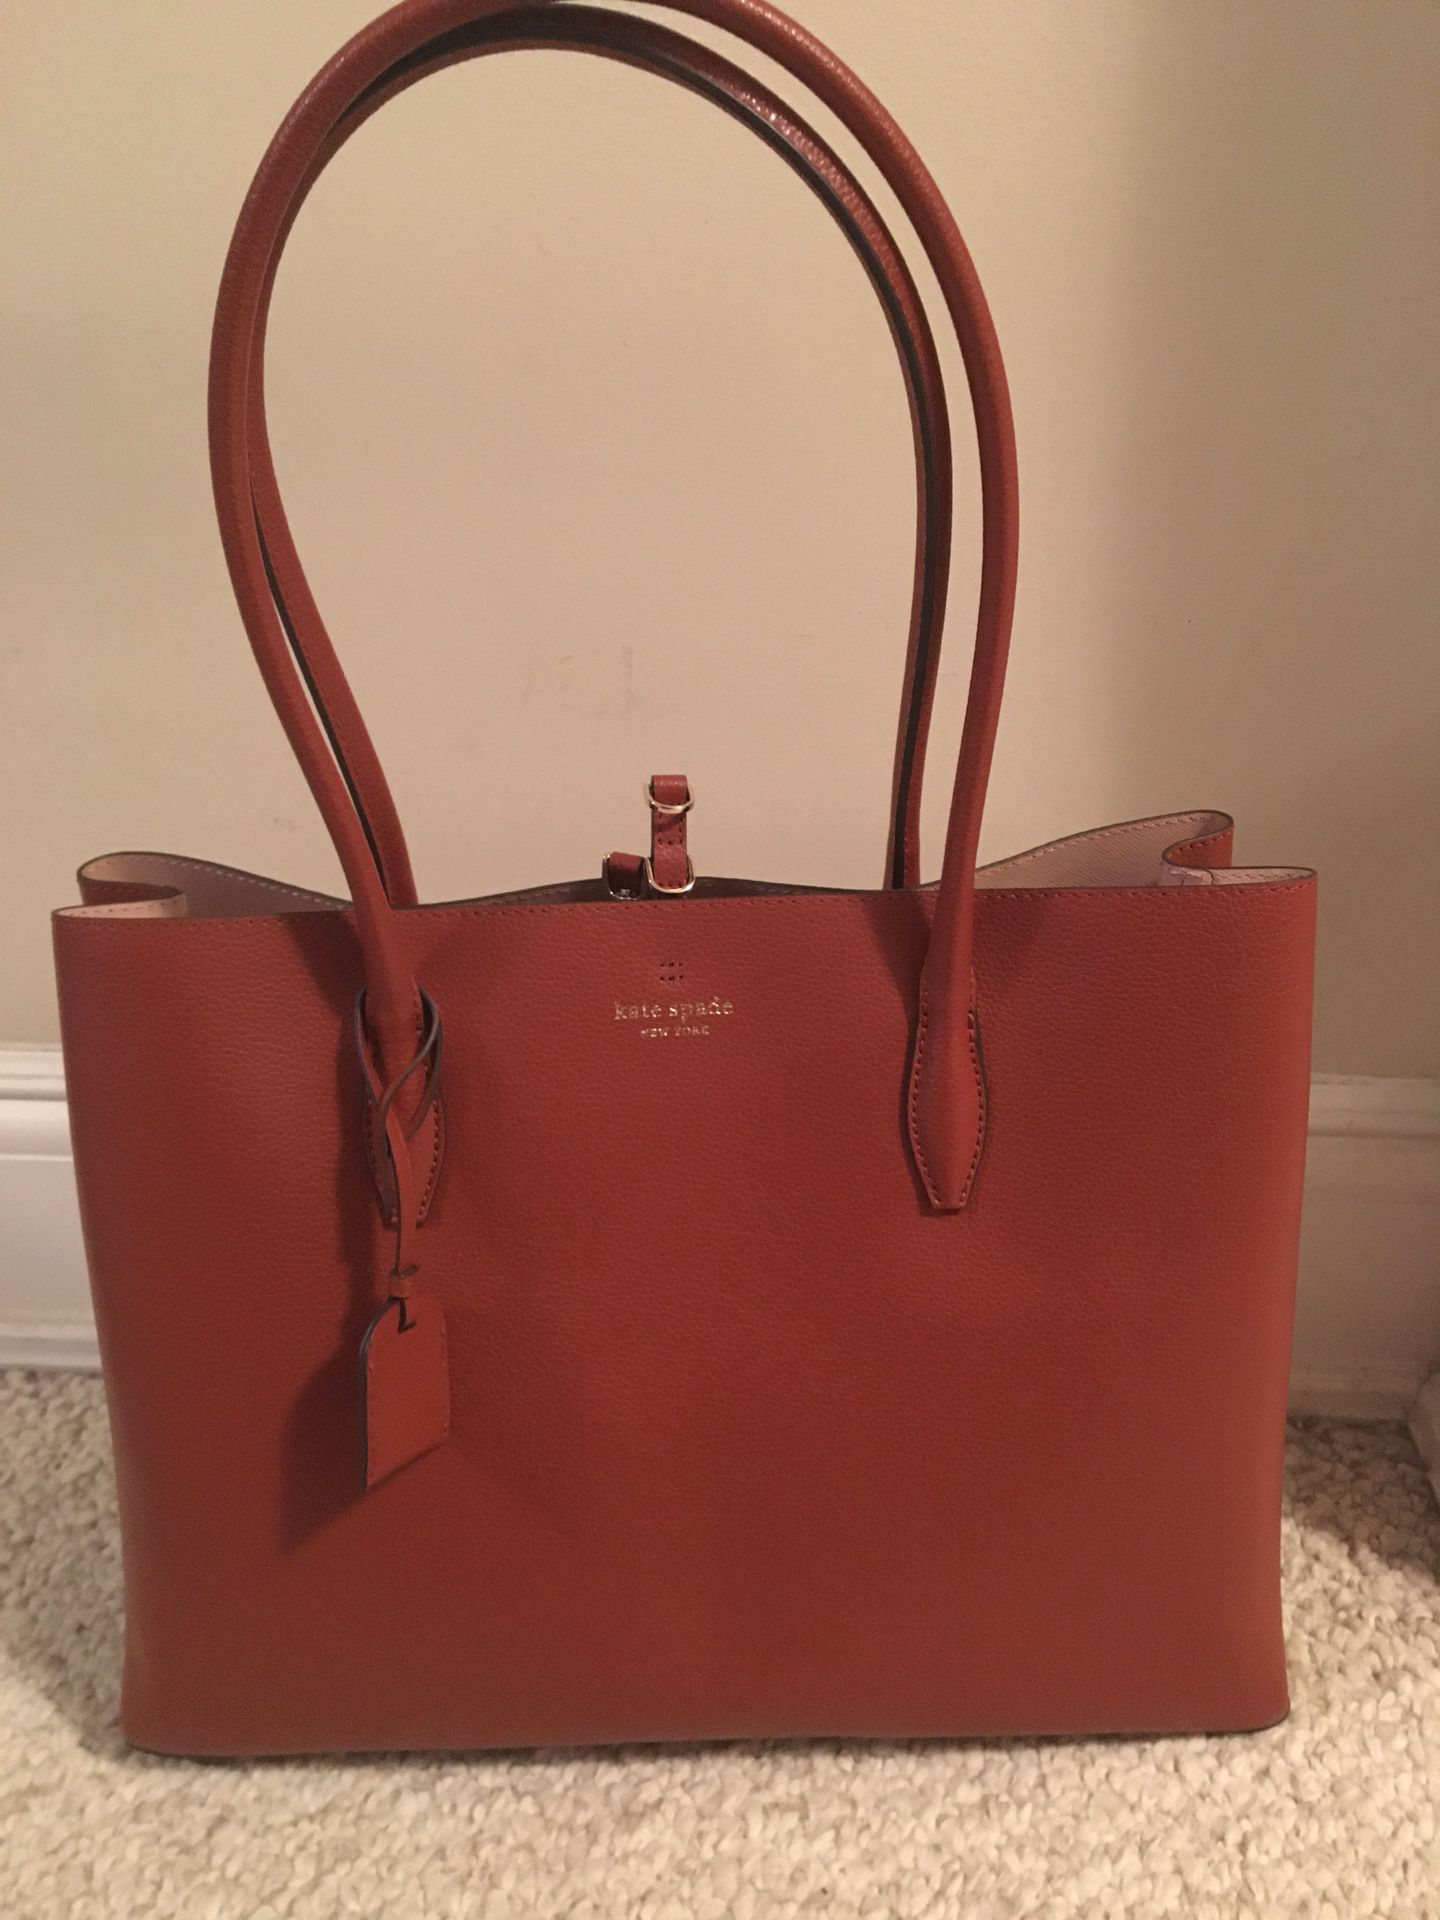 Kate spade large tote Nwts